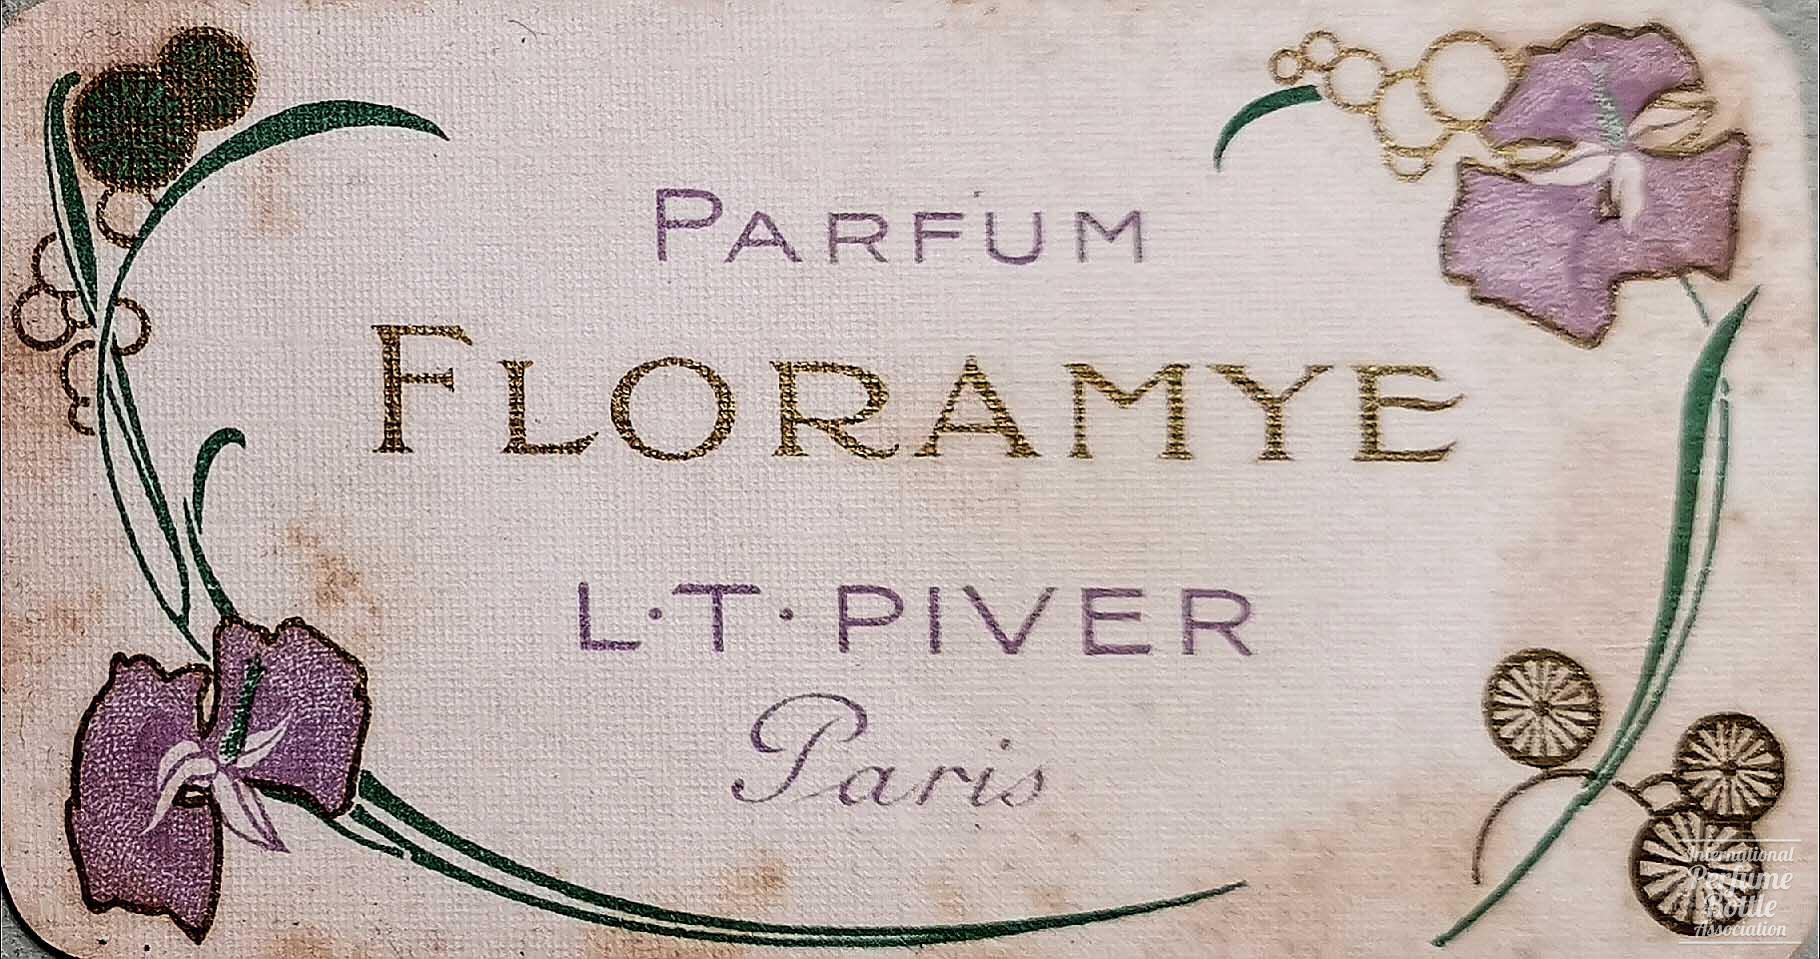 "Floramye" Scent Card by L. T. Piver With 1907 Calendar